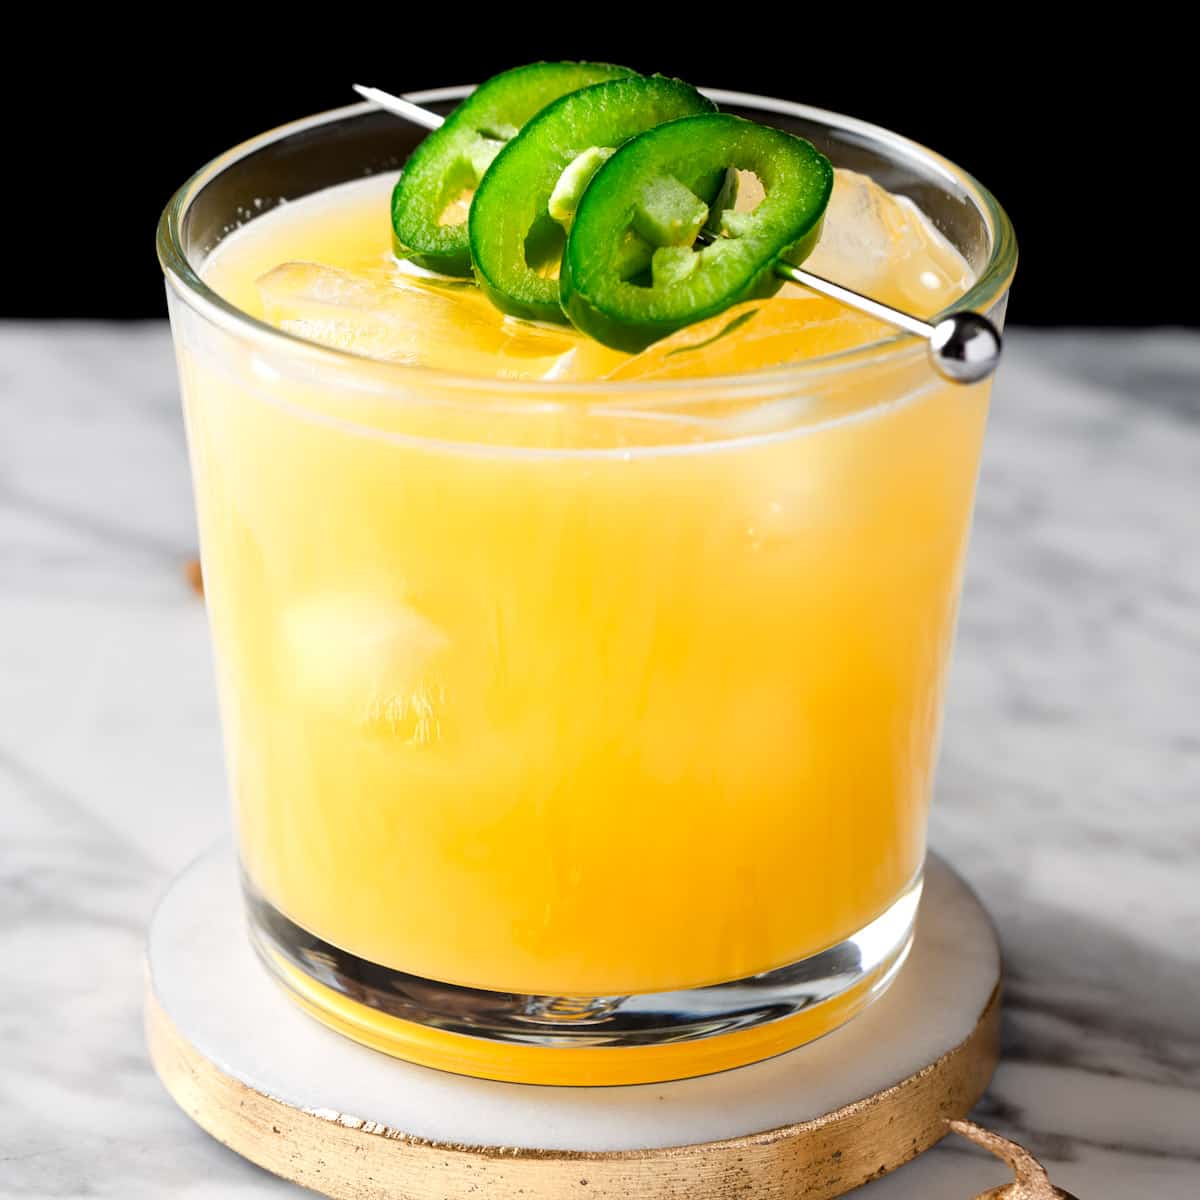 A pineapple mezcal cocktail garnished with jalapeno slices.